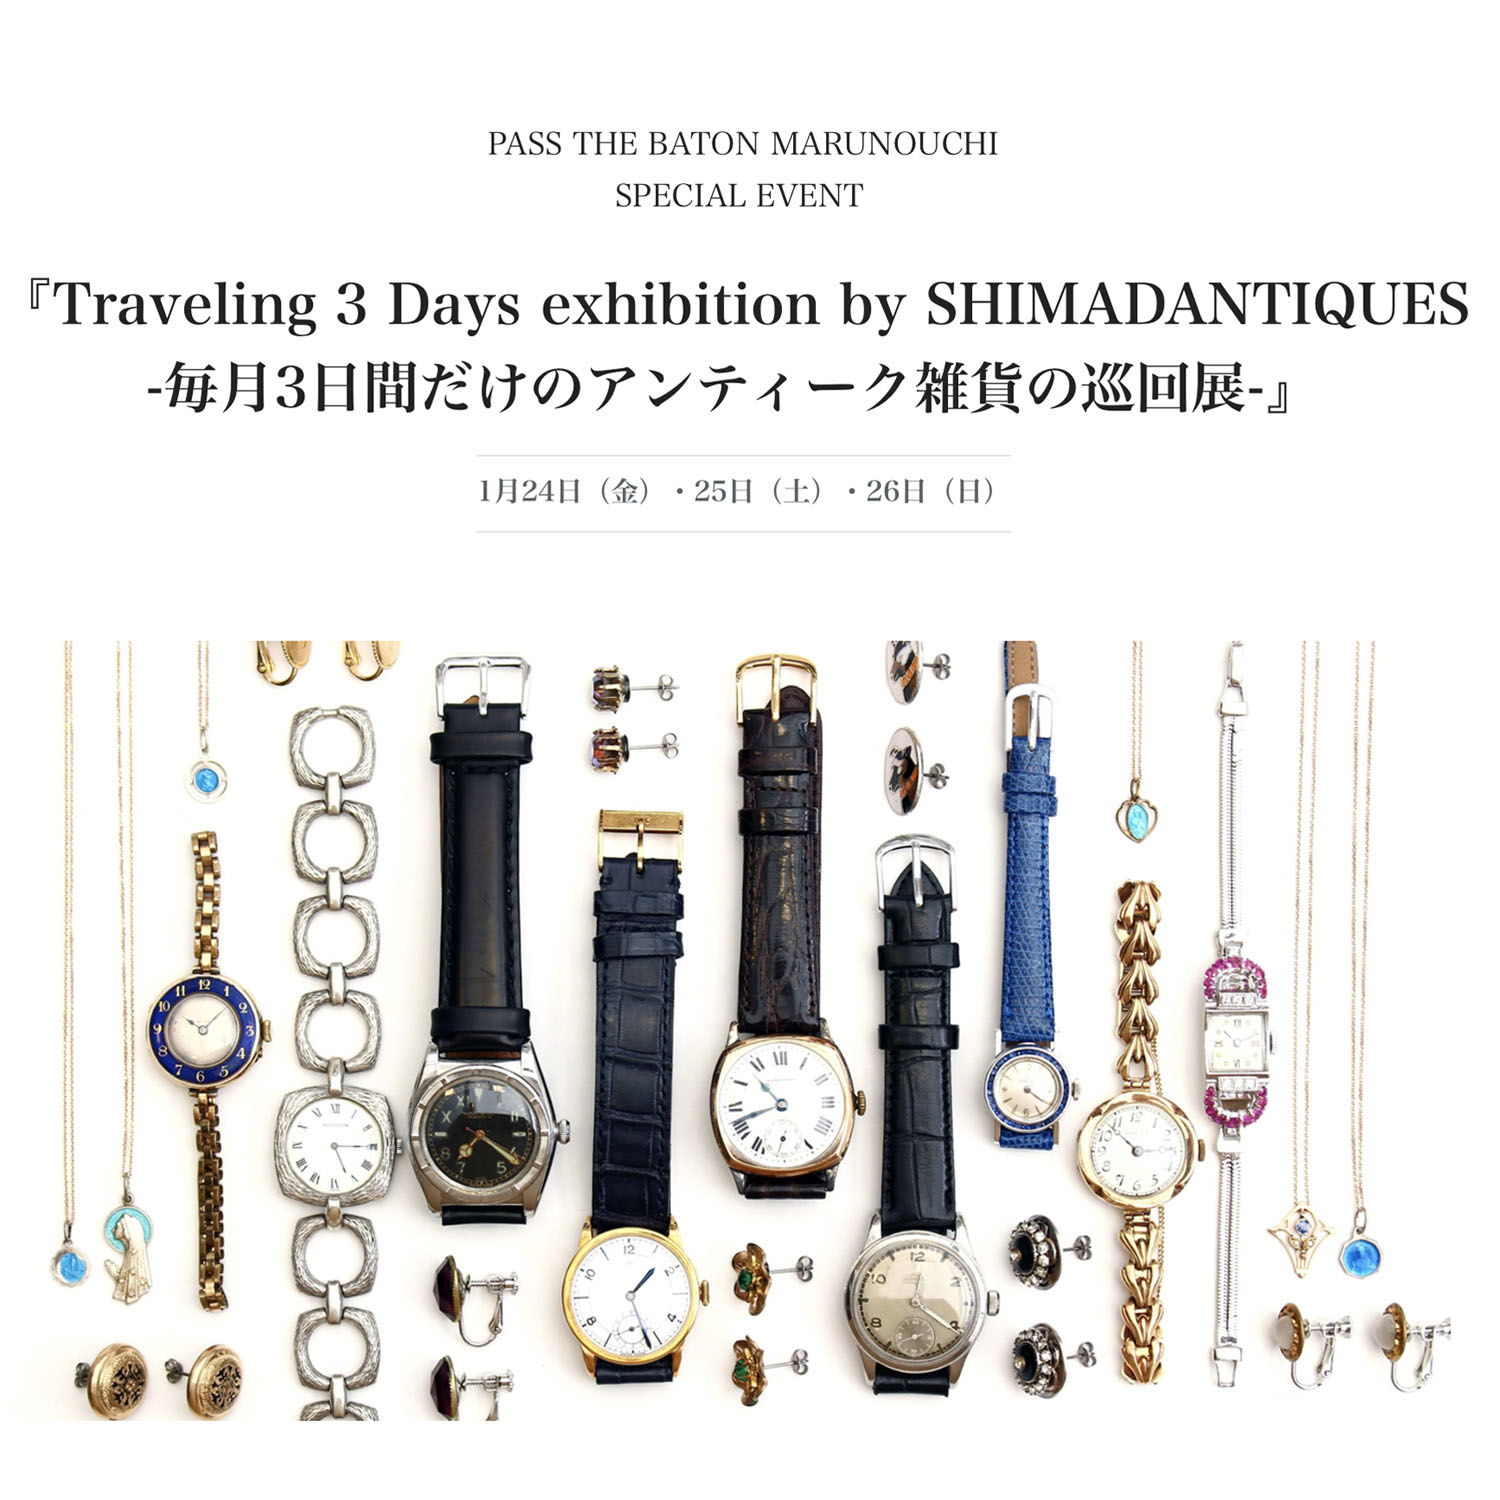 『Traveling 3 Days exhibition by SHIMADANTIQUES』